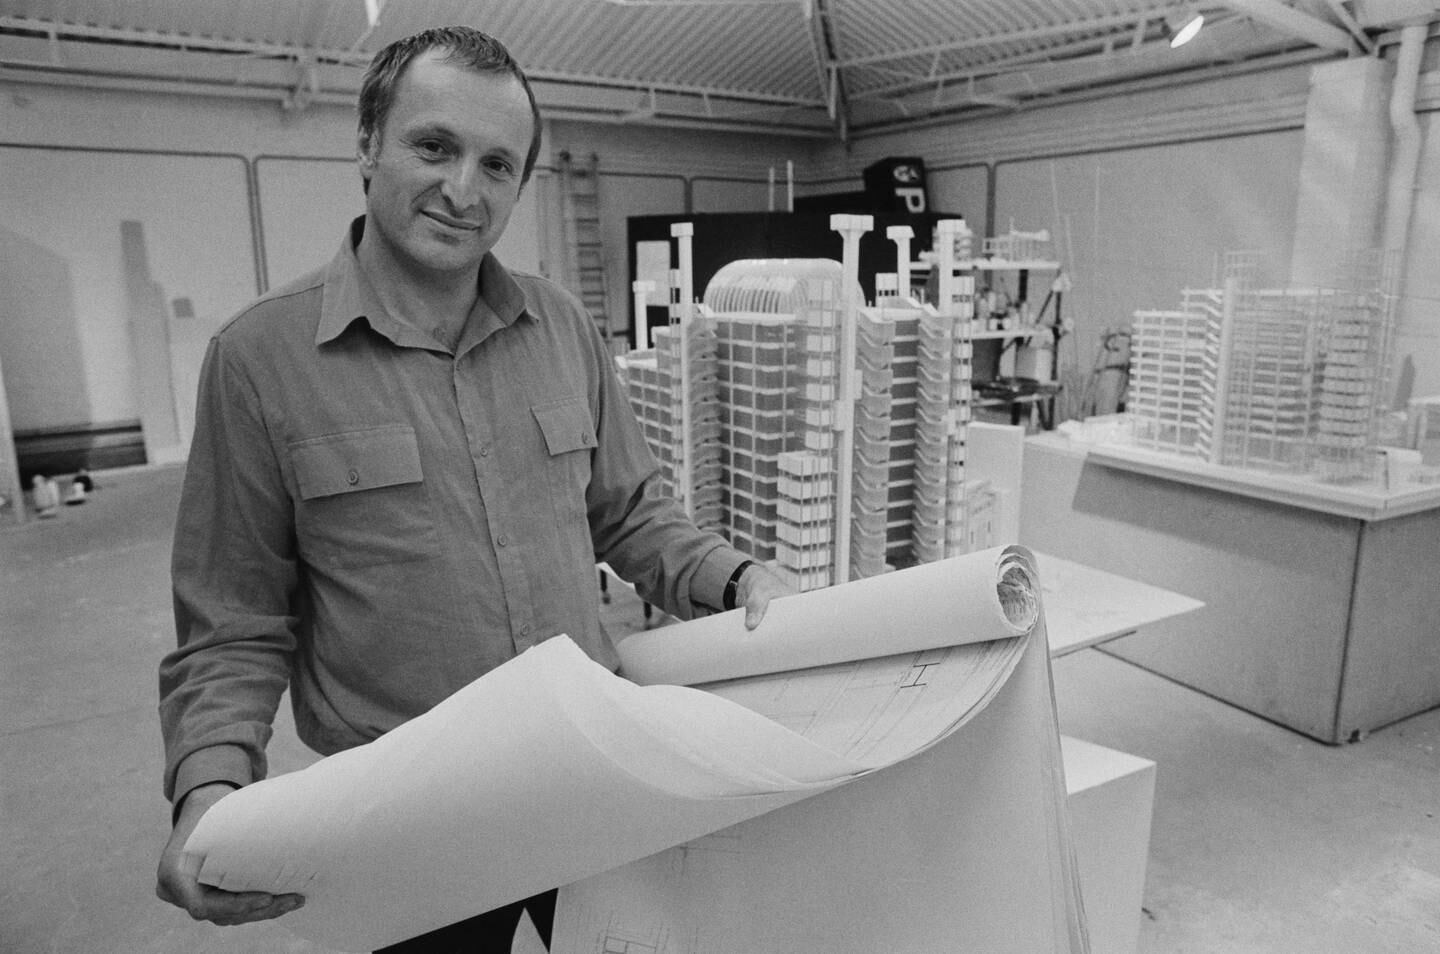 Richard Rogers in his studio in the UK in 1979. Getty Images